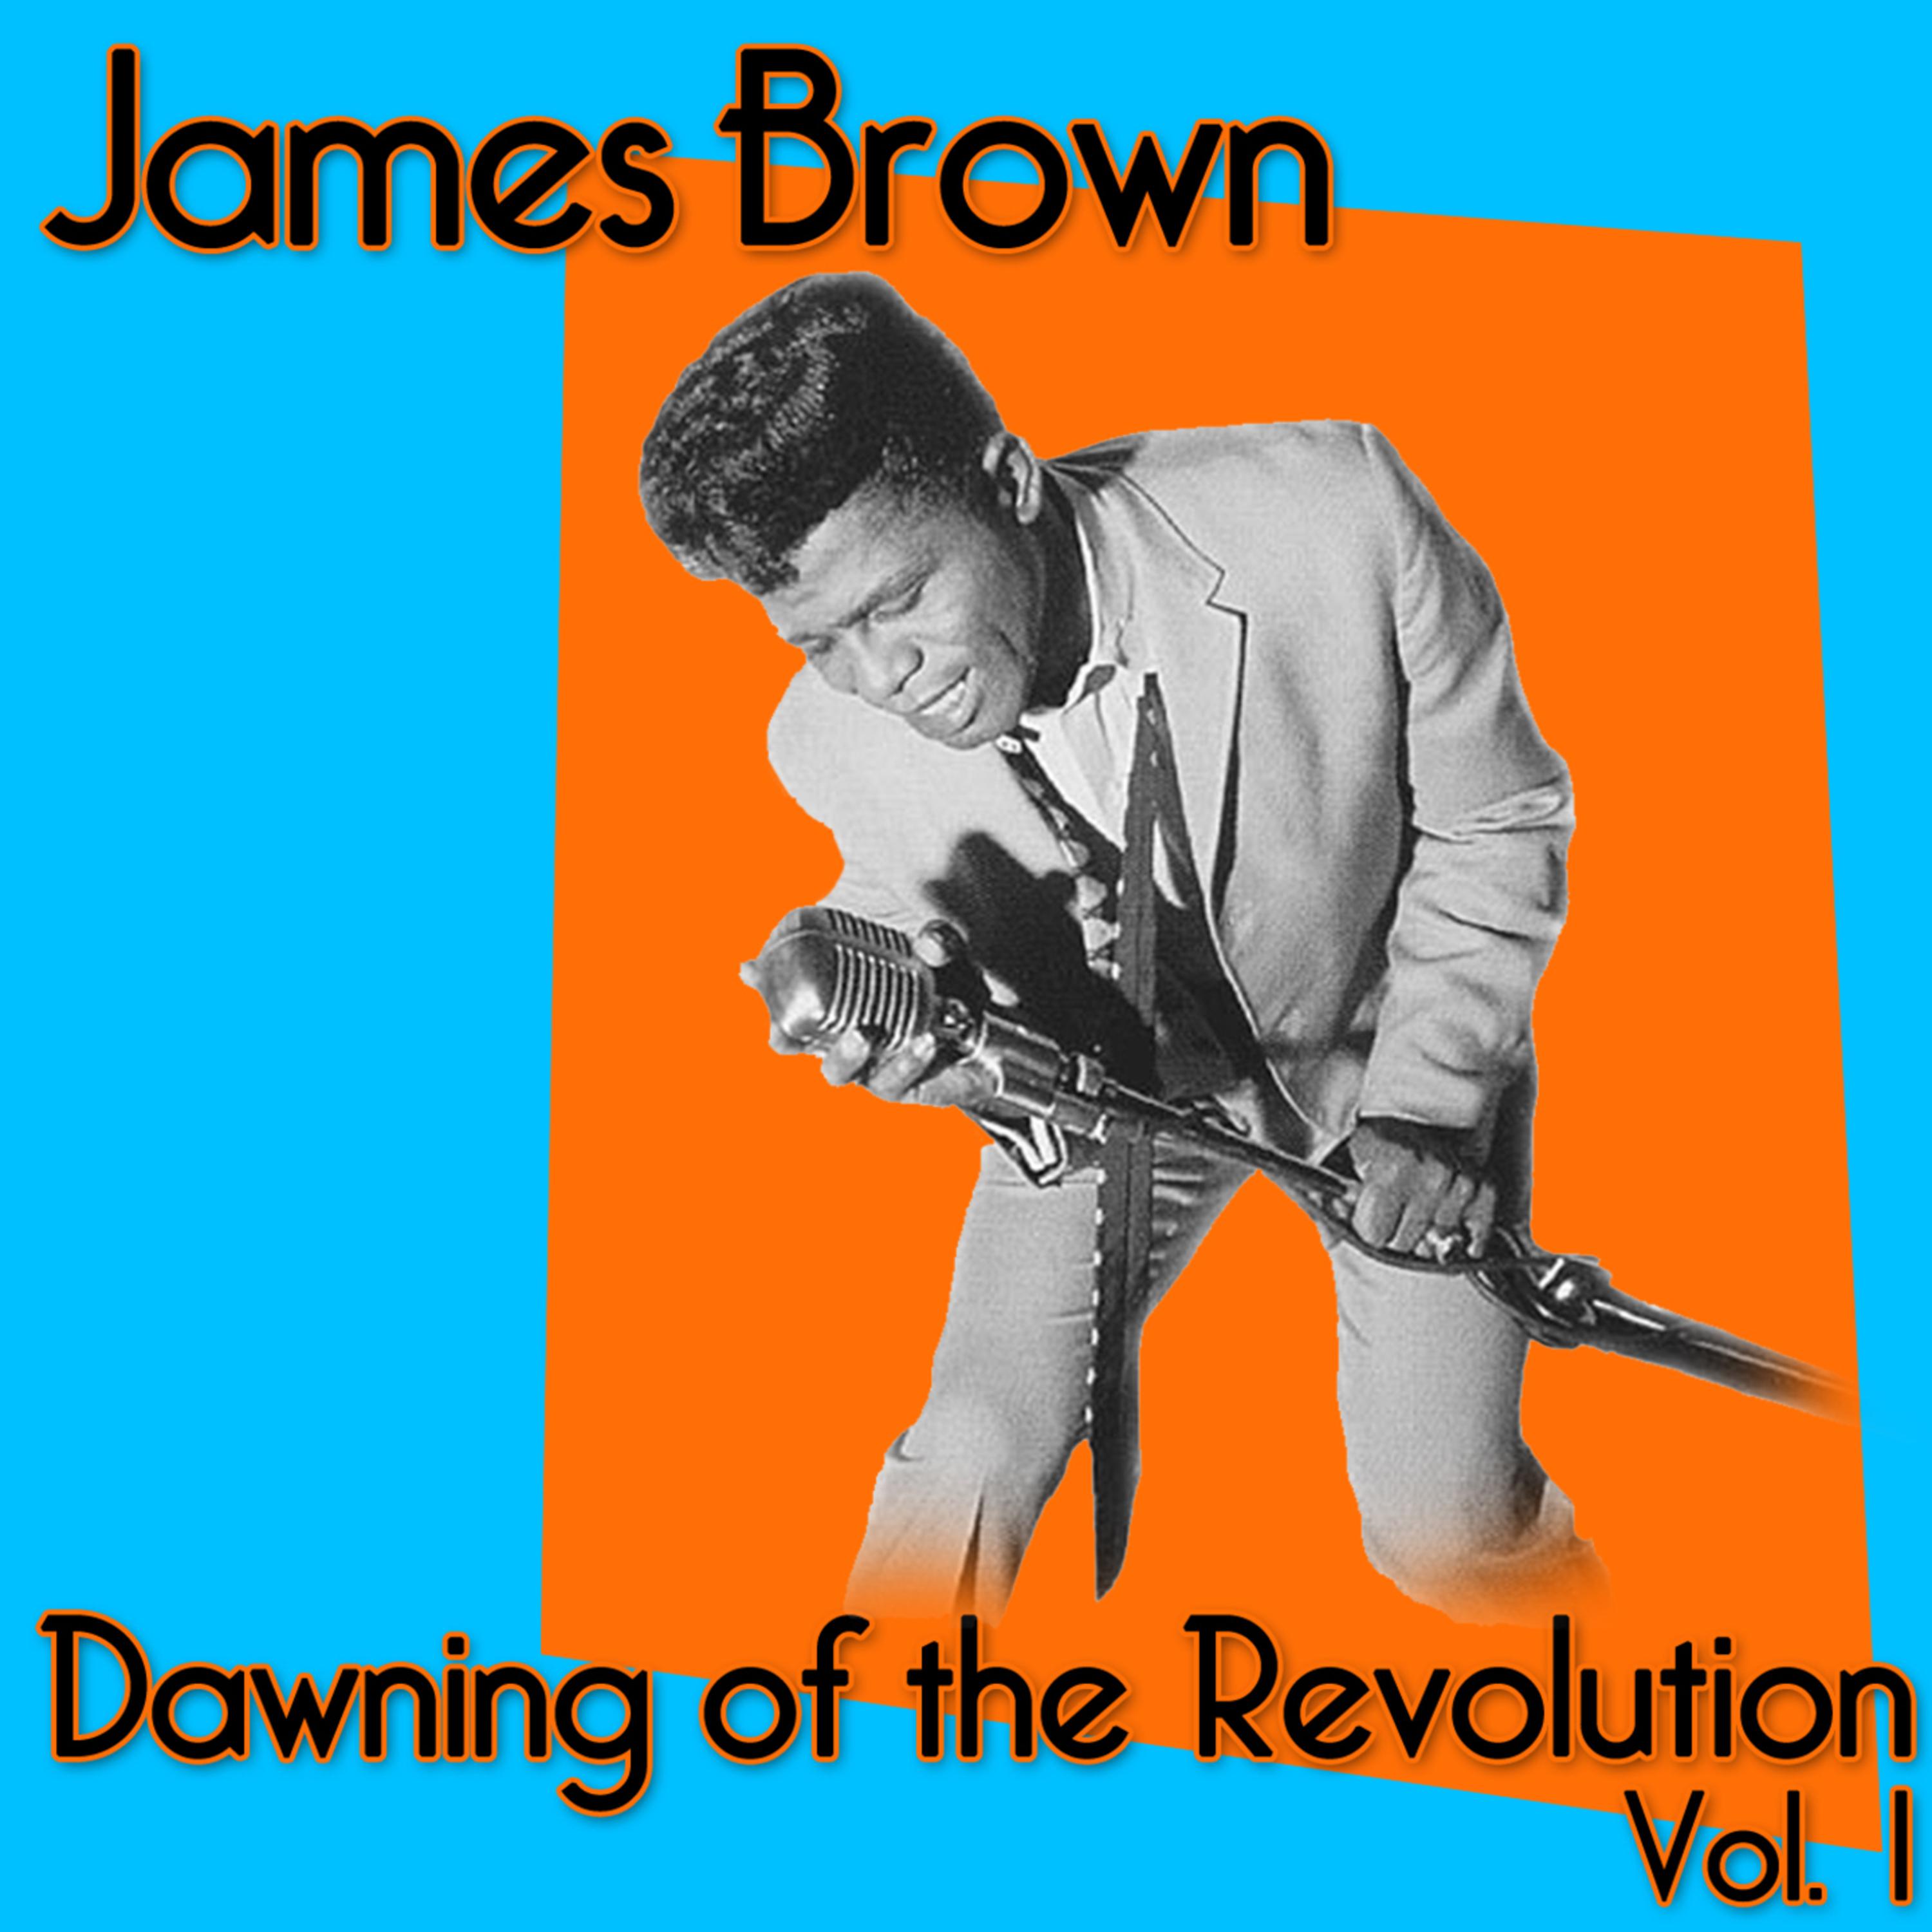 James Brown - Dawning Of The Revolution - Volume 1